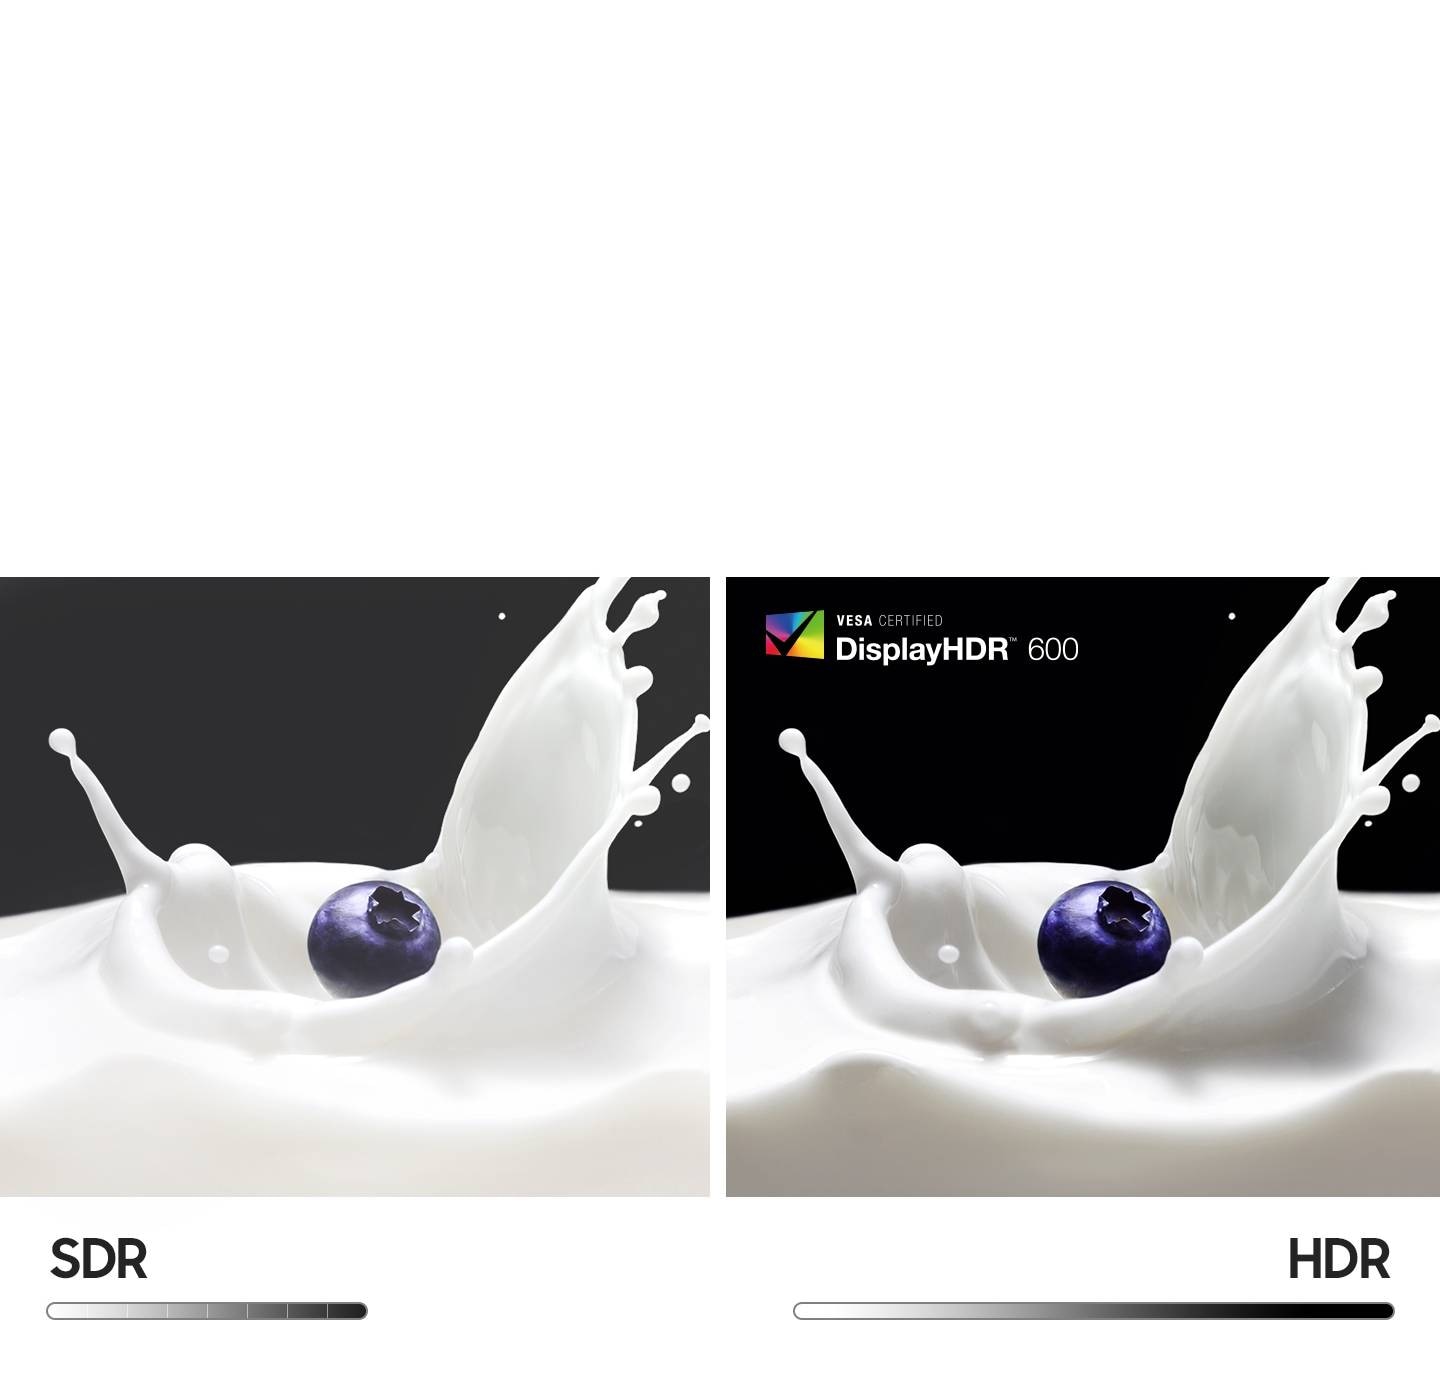 Two identical blueberries side-by-side are shown landing in milk and causing a splash of liquid. The blueberry on the left is demonstrating SDR, while the blueberry on the right is demonstrating HDR, overlaid with the logo †VESA Certified DisplayHDR 600'. Compared to SDR part, HDR shows much deeper dark colors and more vivid bright colors. Below are located black-and-white bars, which are longer and more sophisticated for HDR compared to SDR.